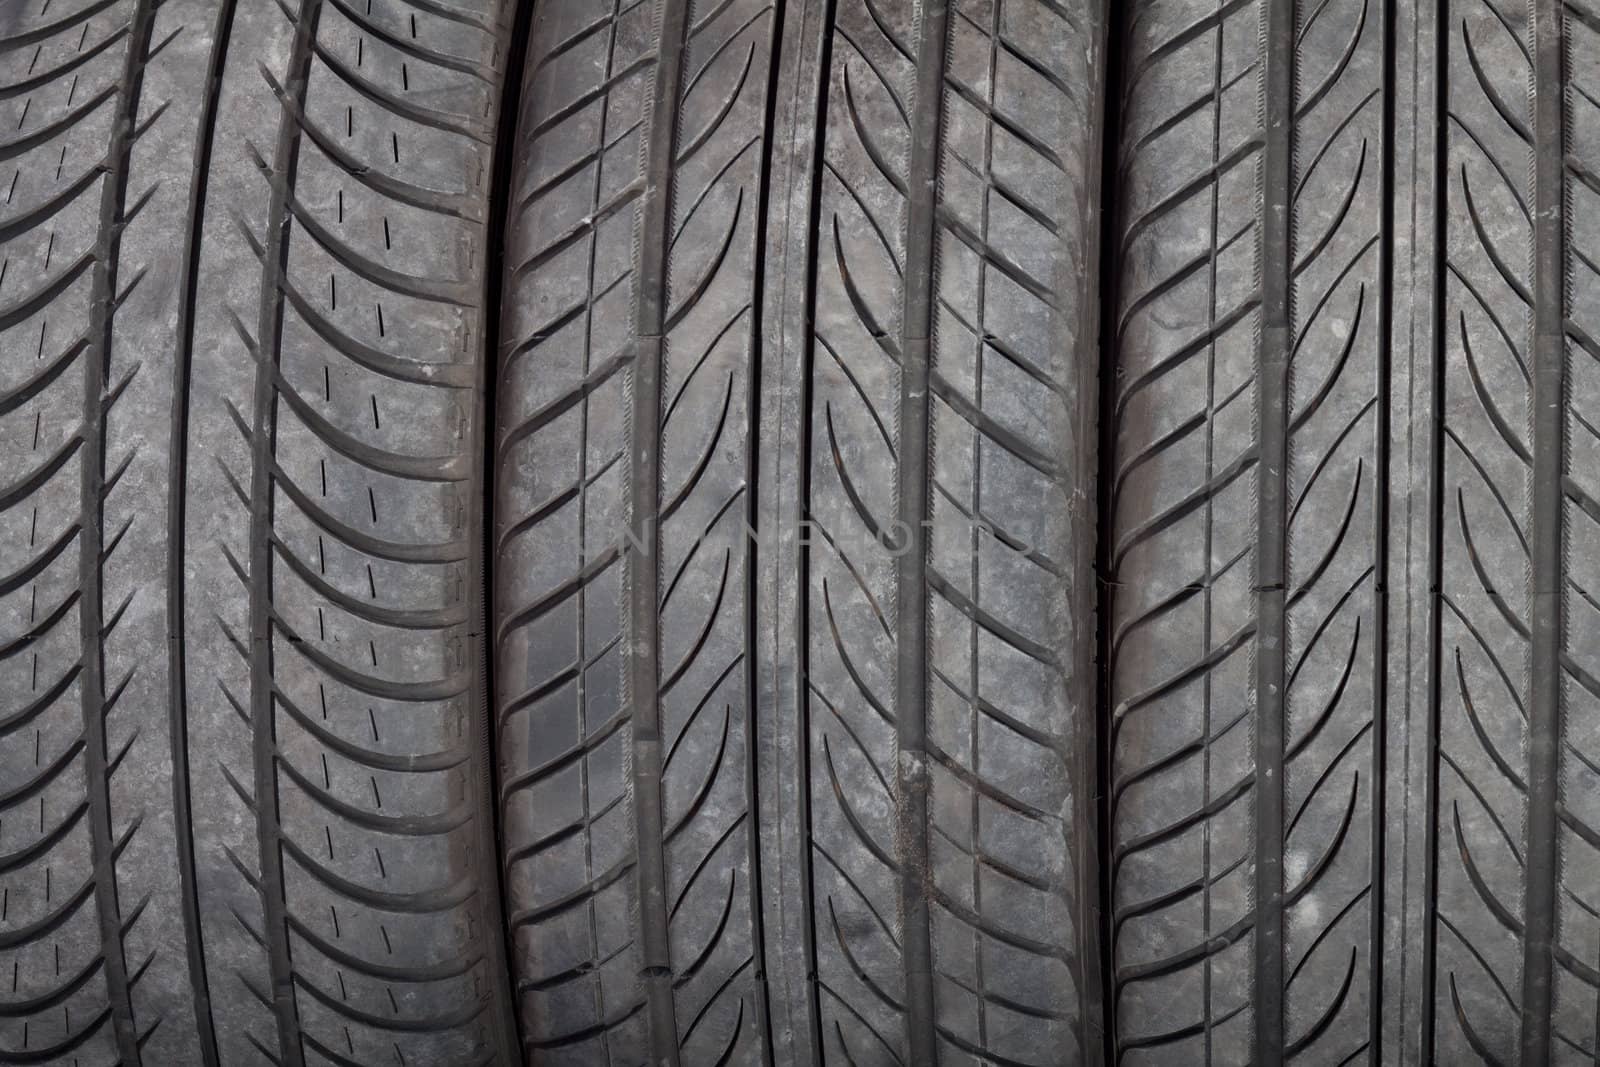 Used, dirty tires, abstract background